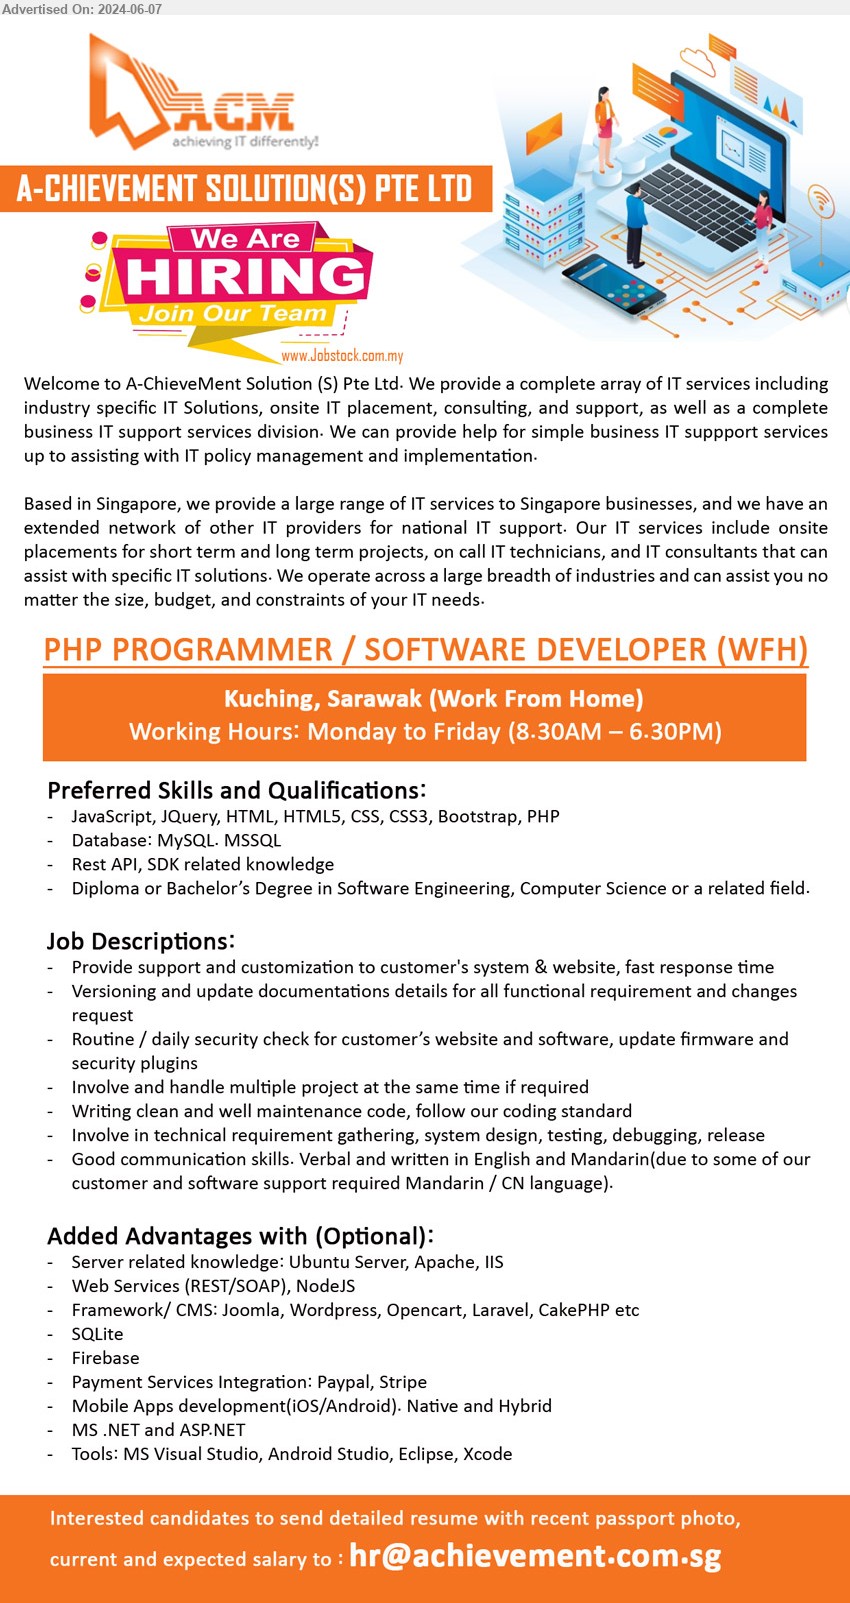 A-CHIEVEMENT SOLUTION(S) PTE LTD - PHP PROGRAMMER / SOFTWARE DEVELOPER (WFH) (Kuching - Work from home), Diploma or Bachelor’s Degree in Software Engineering, Computer Science,...
Email resume to ...